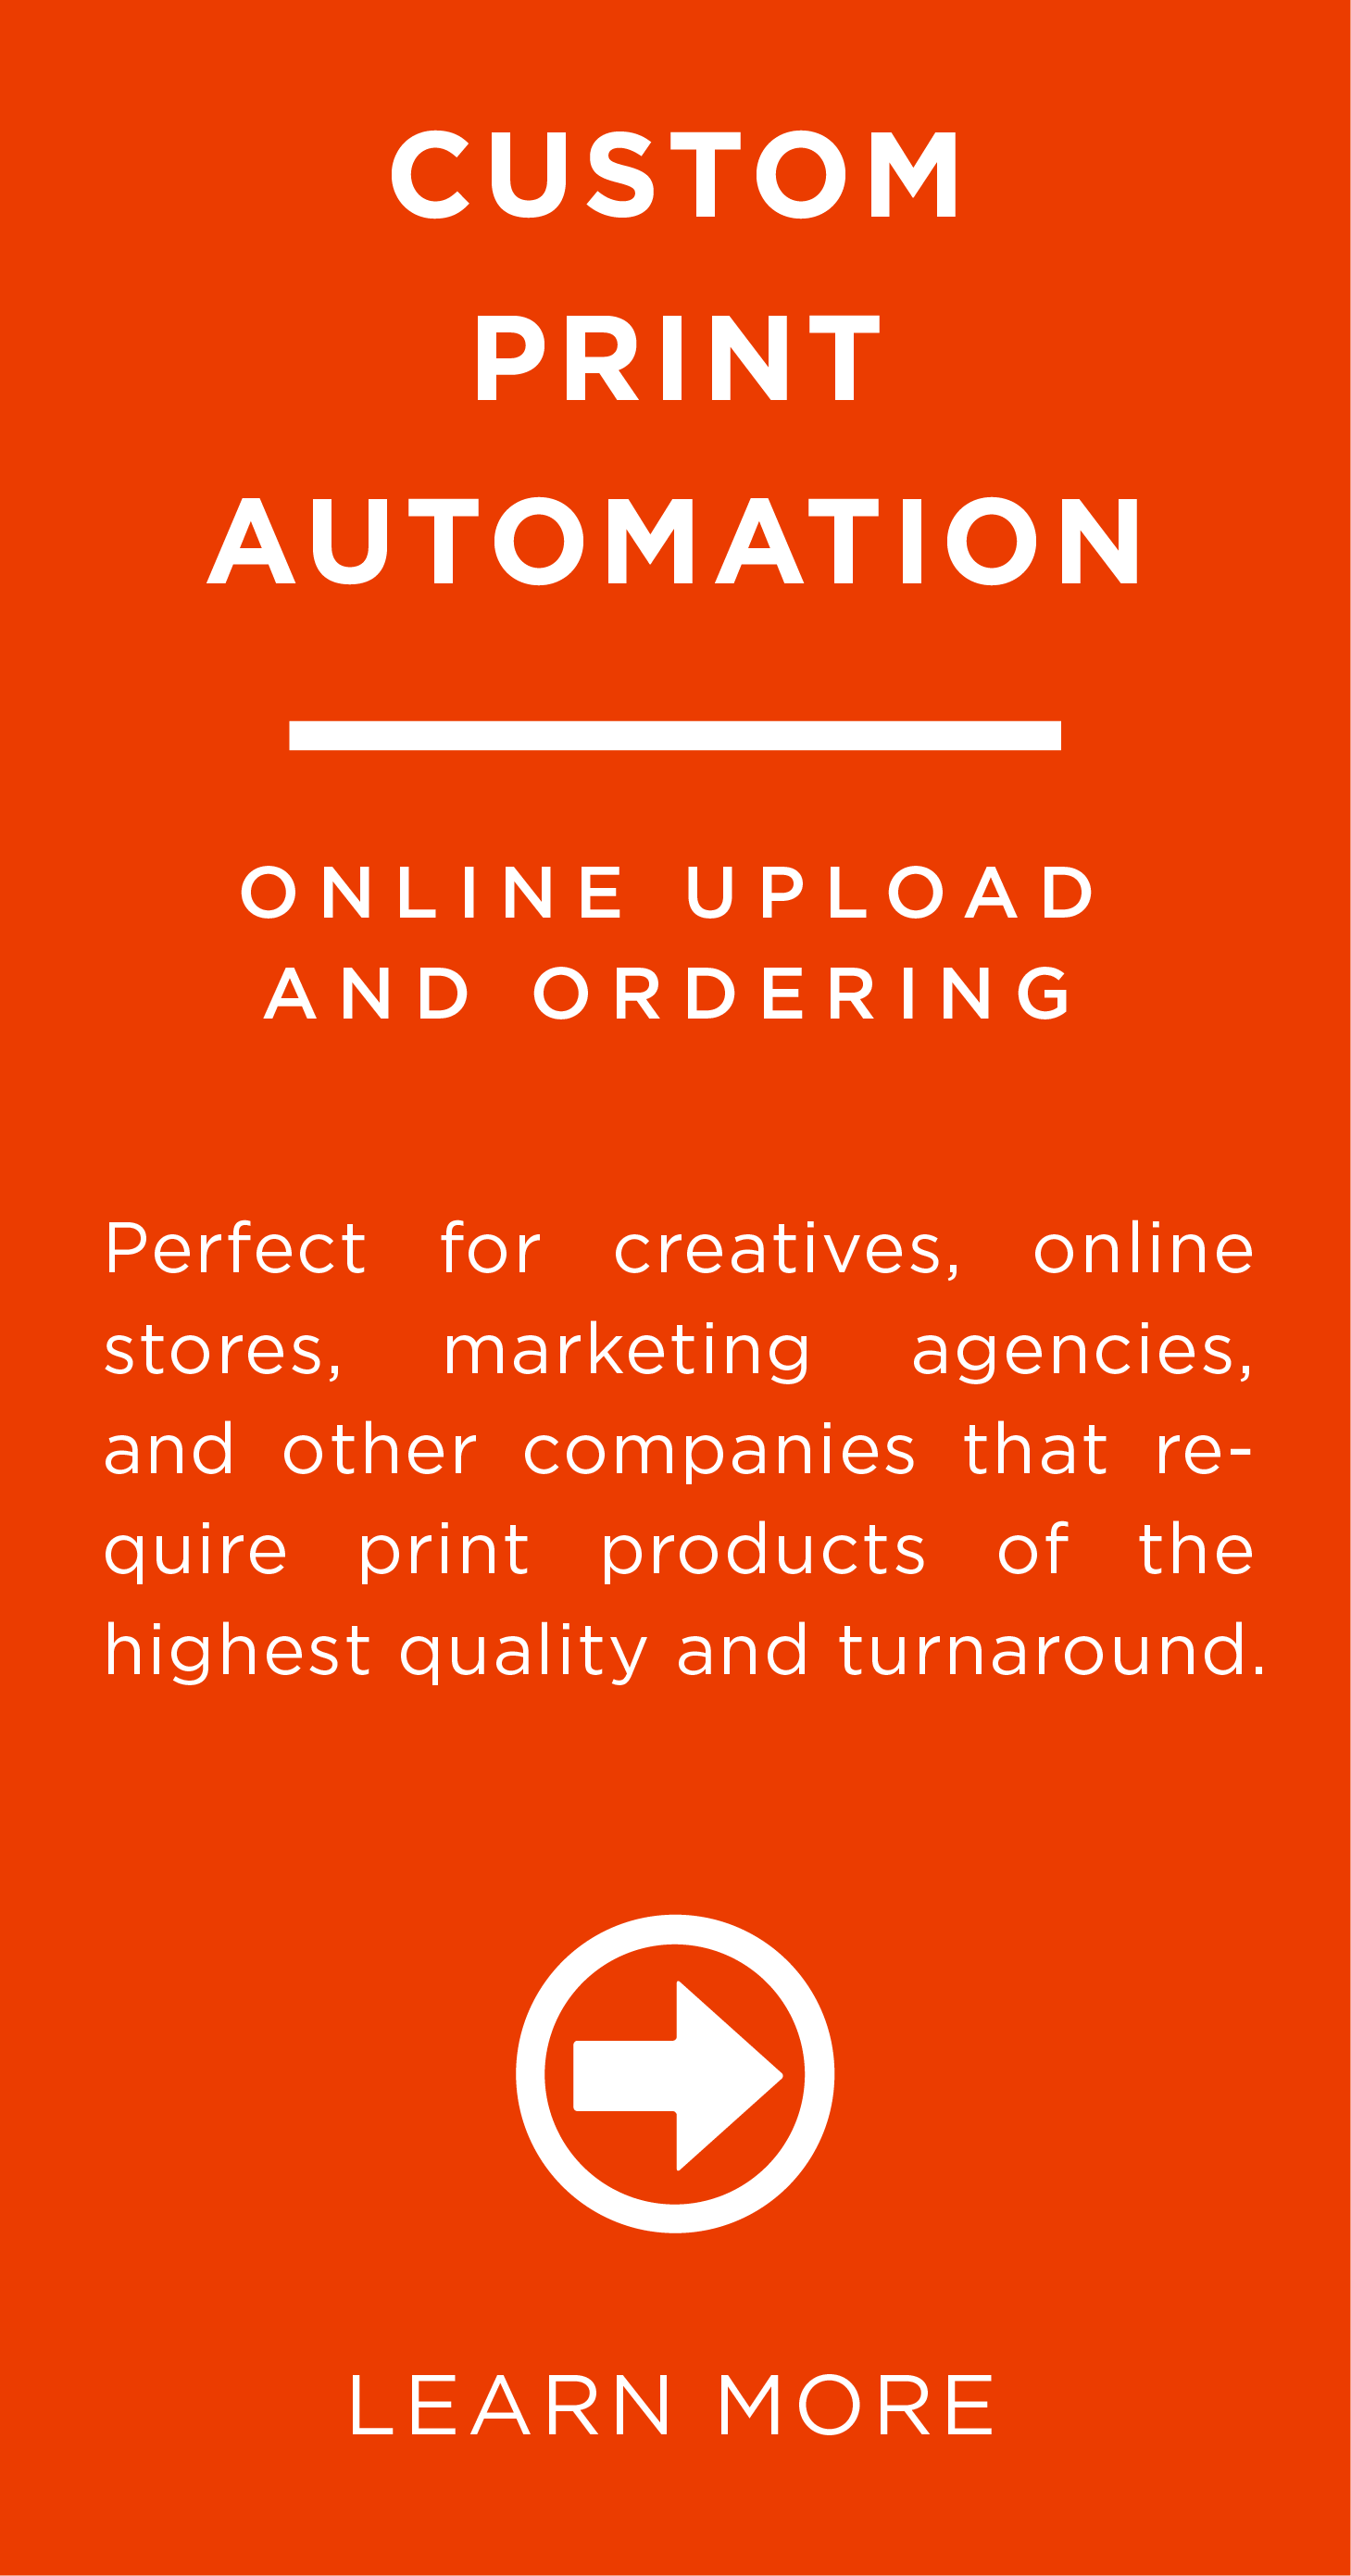 <h2>Online Upload and Ordering</h2> <p>Perfect for creatives, online stores, marketing agencies, and other companies that require print products of the highest quality and turnaround.</p>